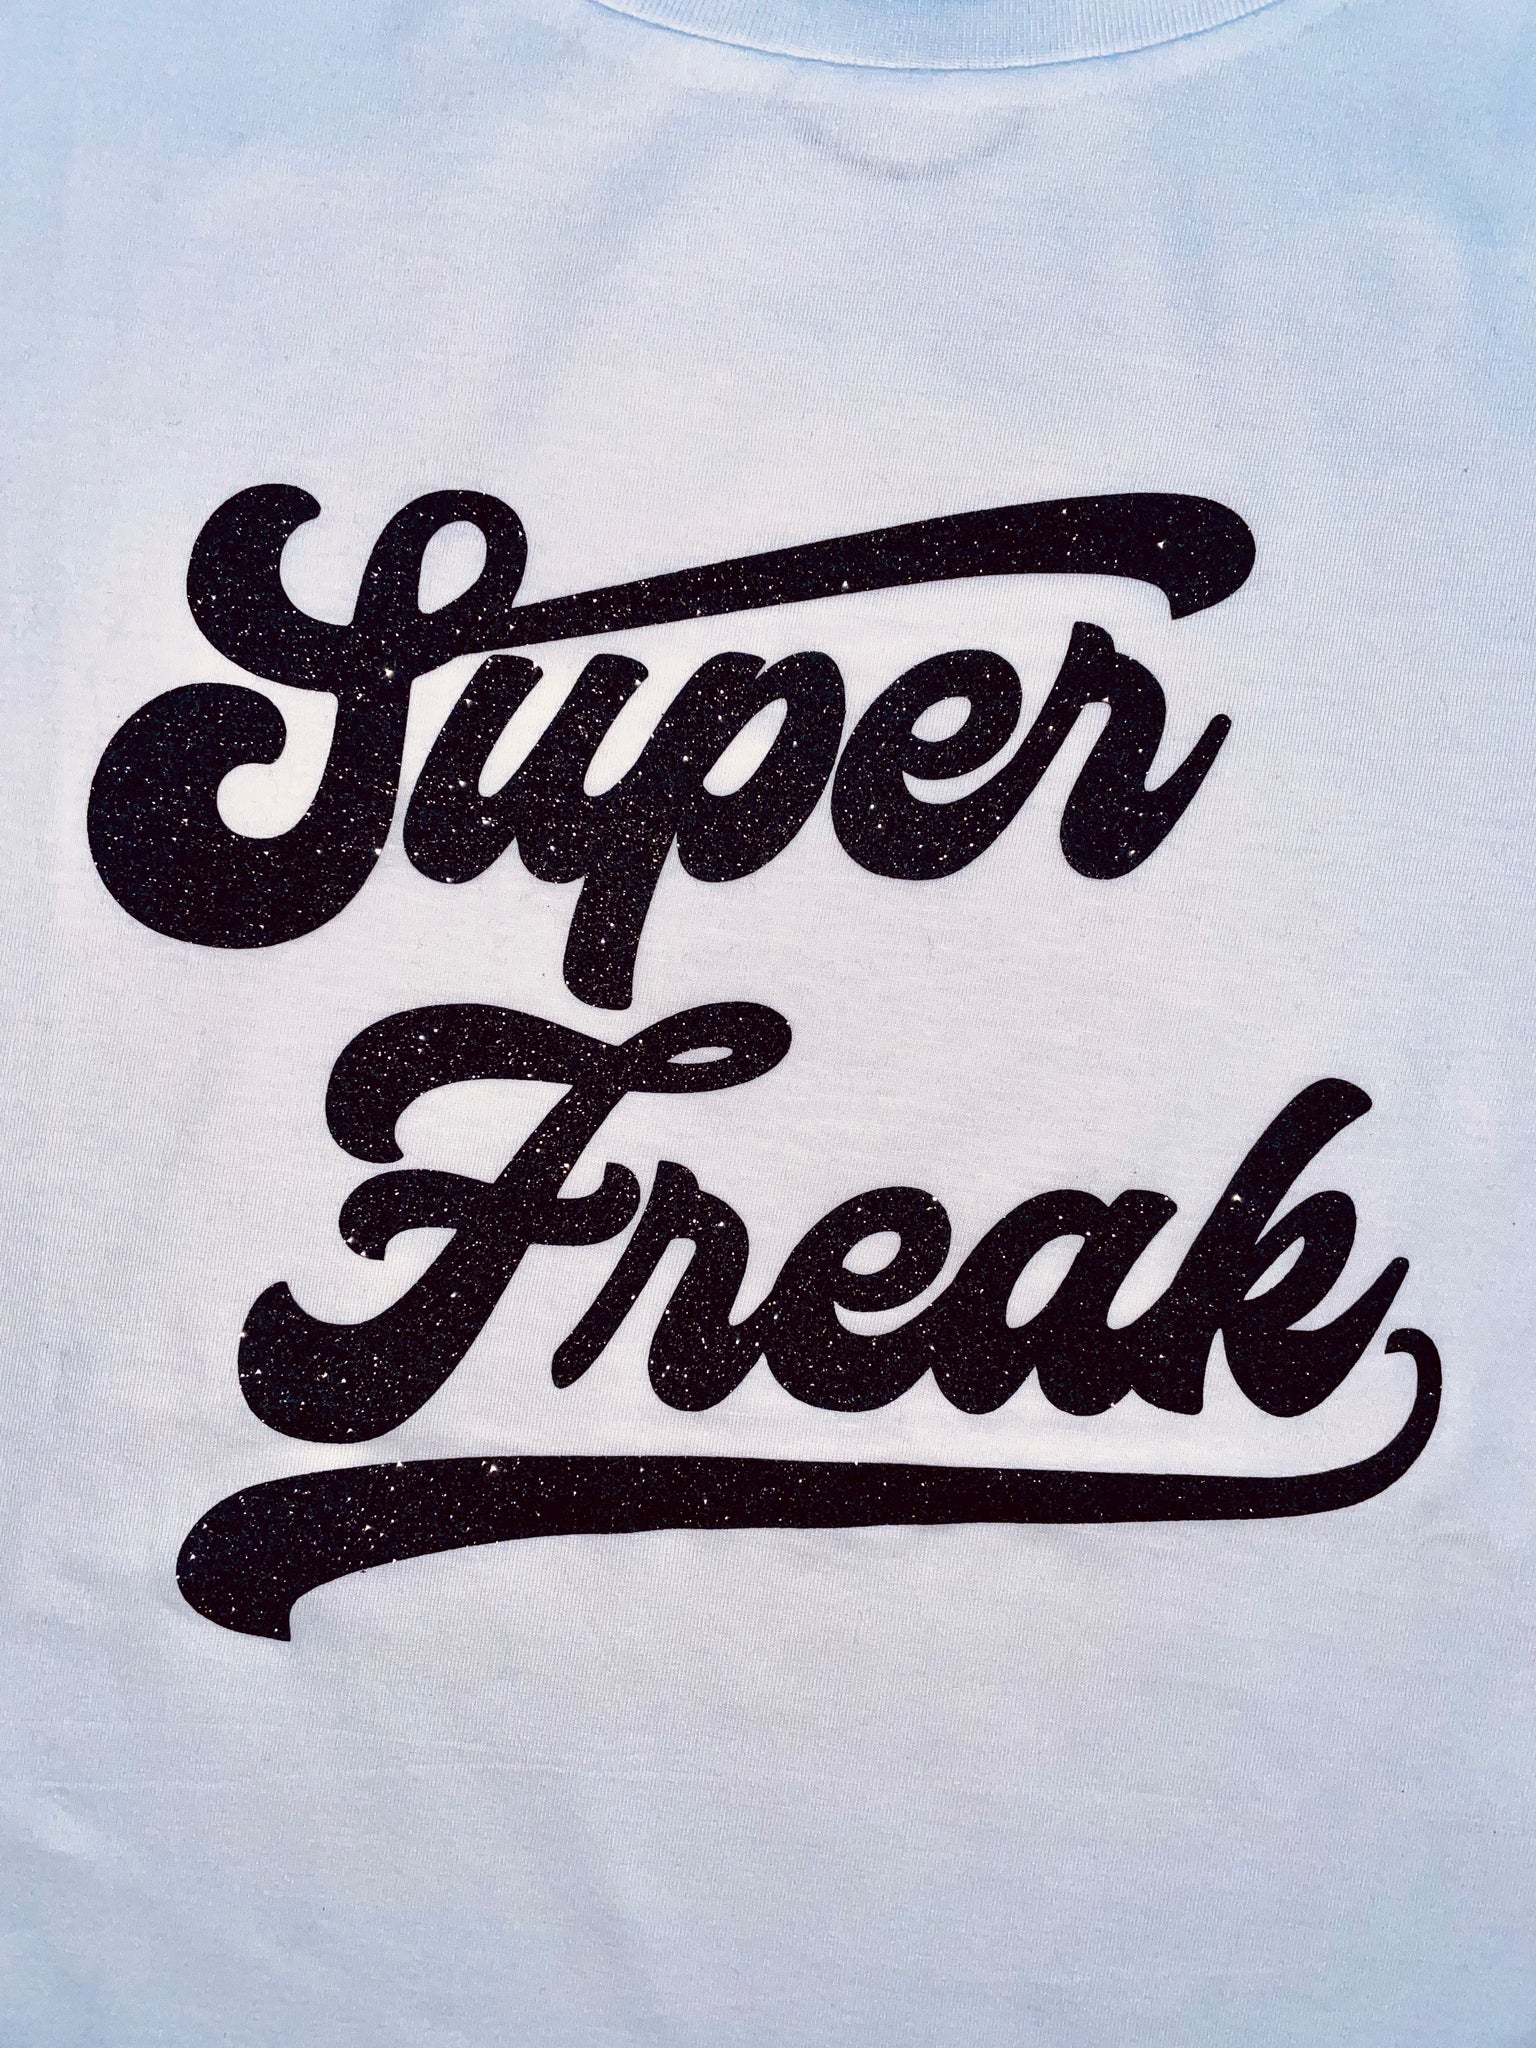 The White and Black Sparkly Super Freak T-Shirt